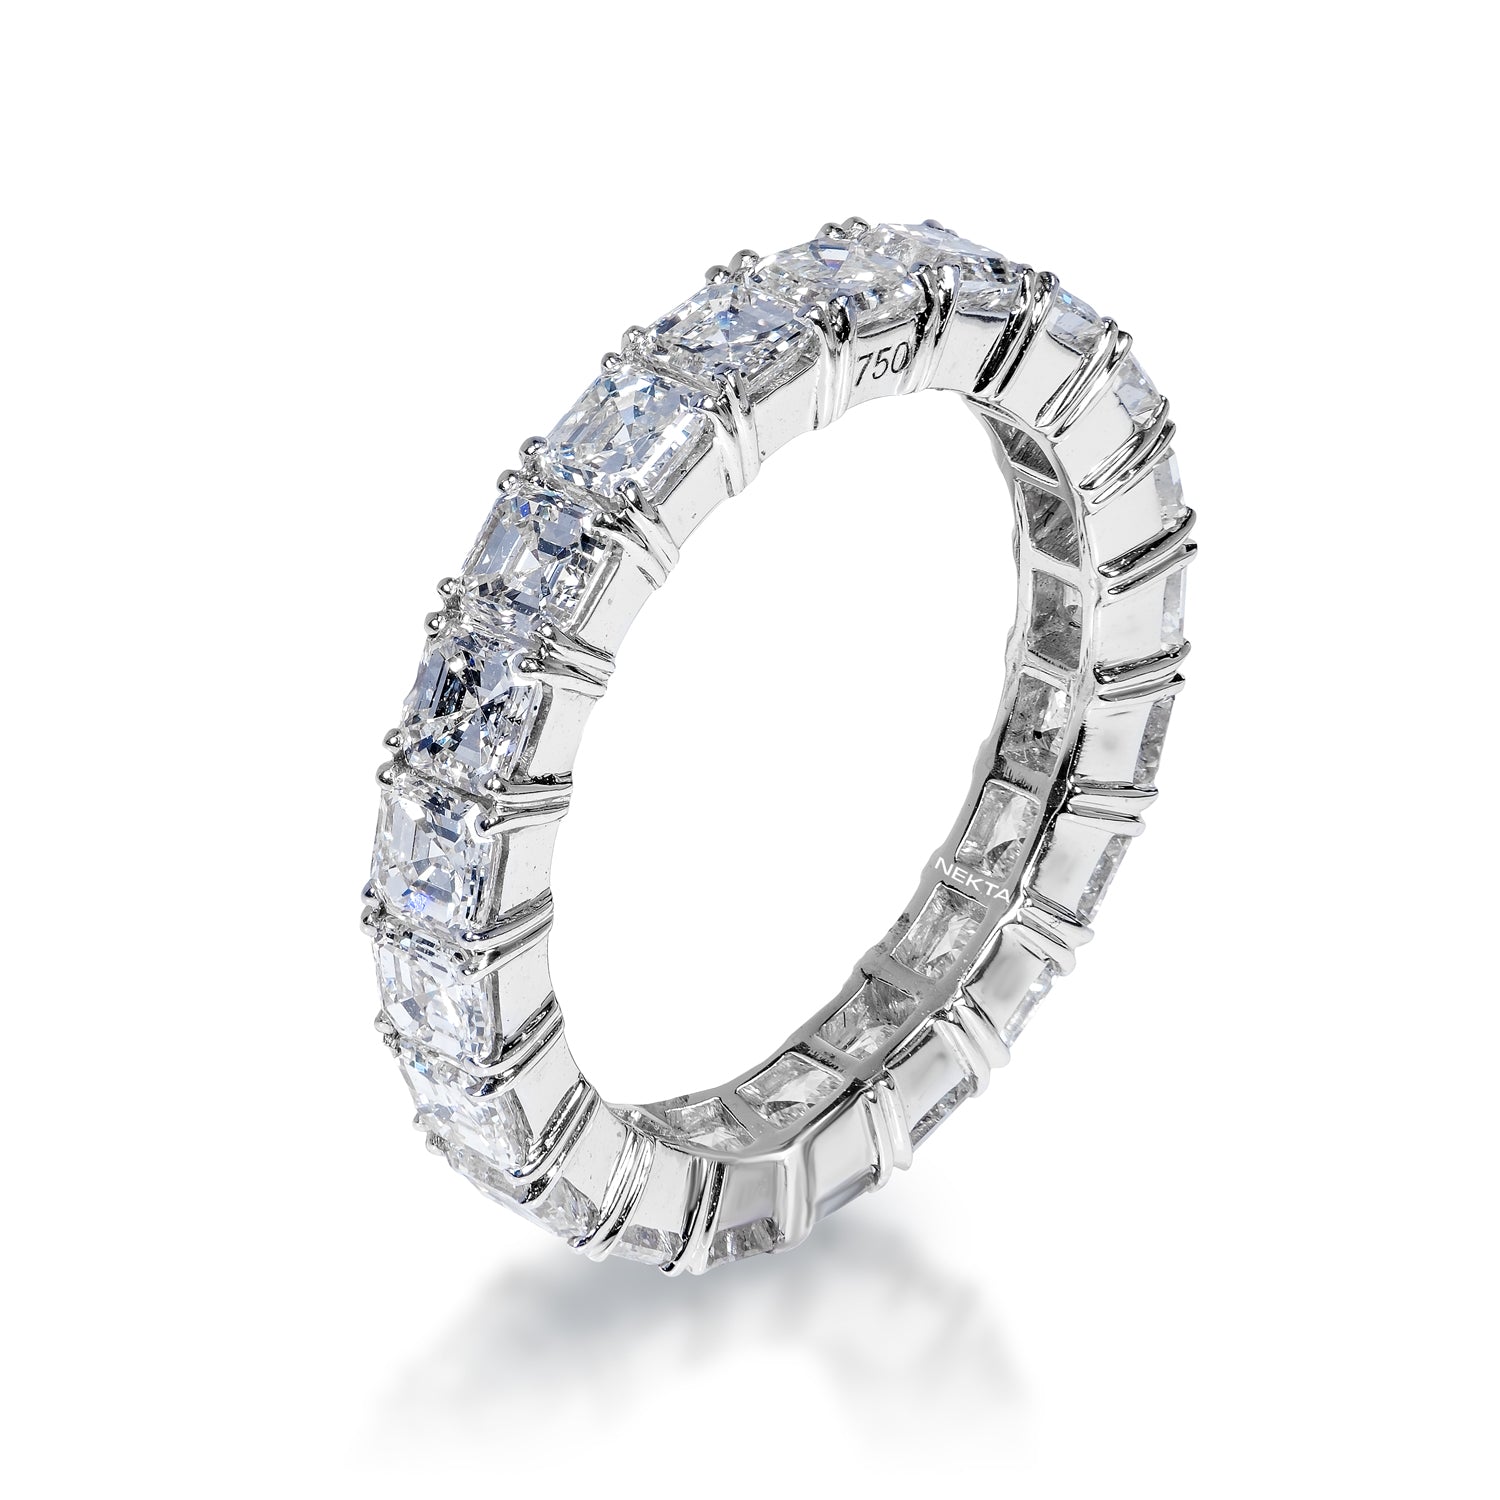 Della 3 Carat Asscher Cut Diamond Eternity Band in 18k White Gold Shared Prong Side View